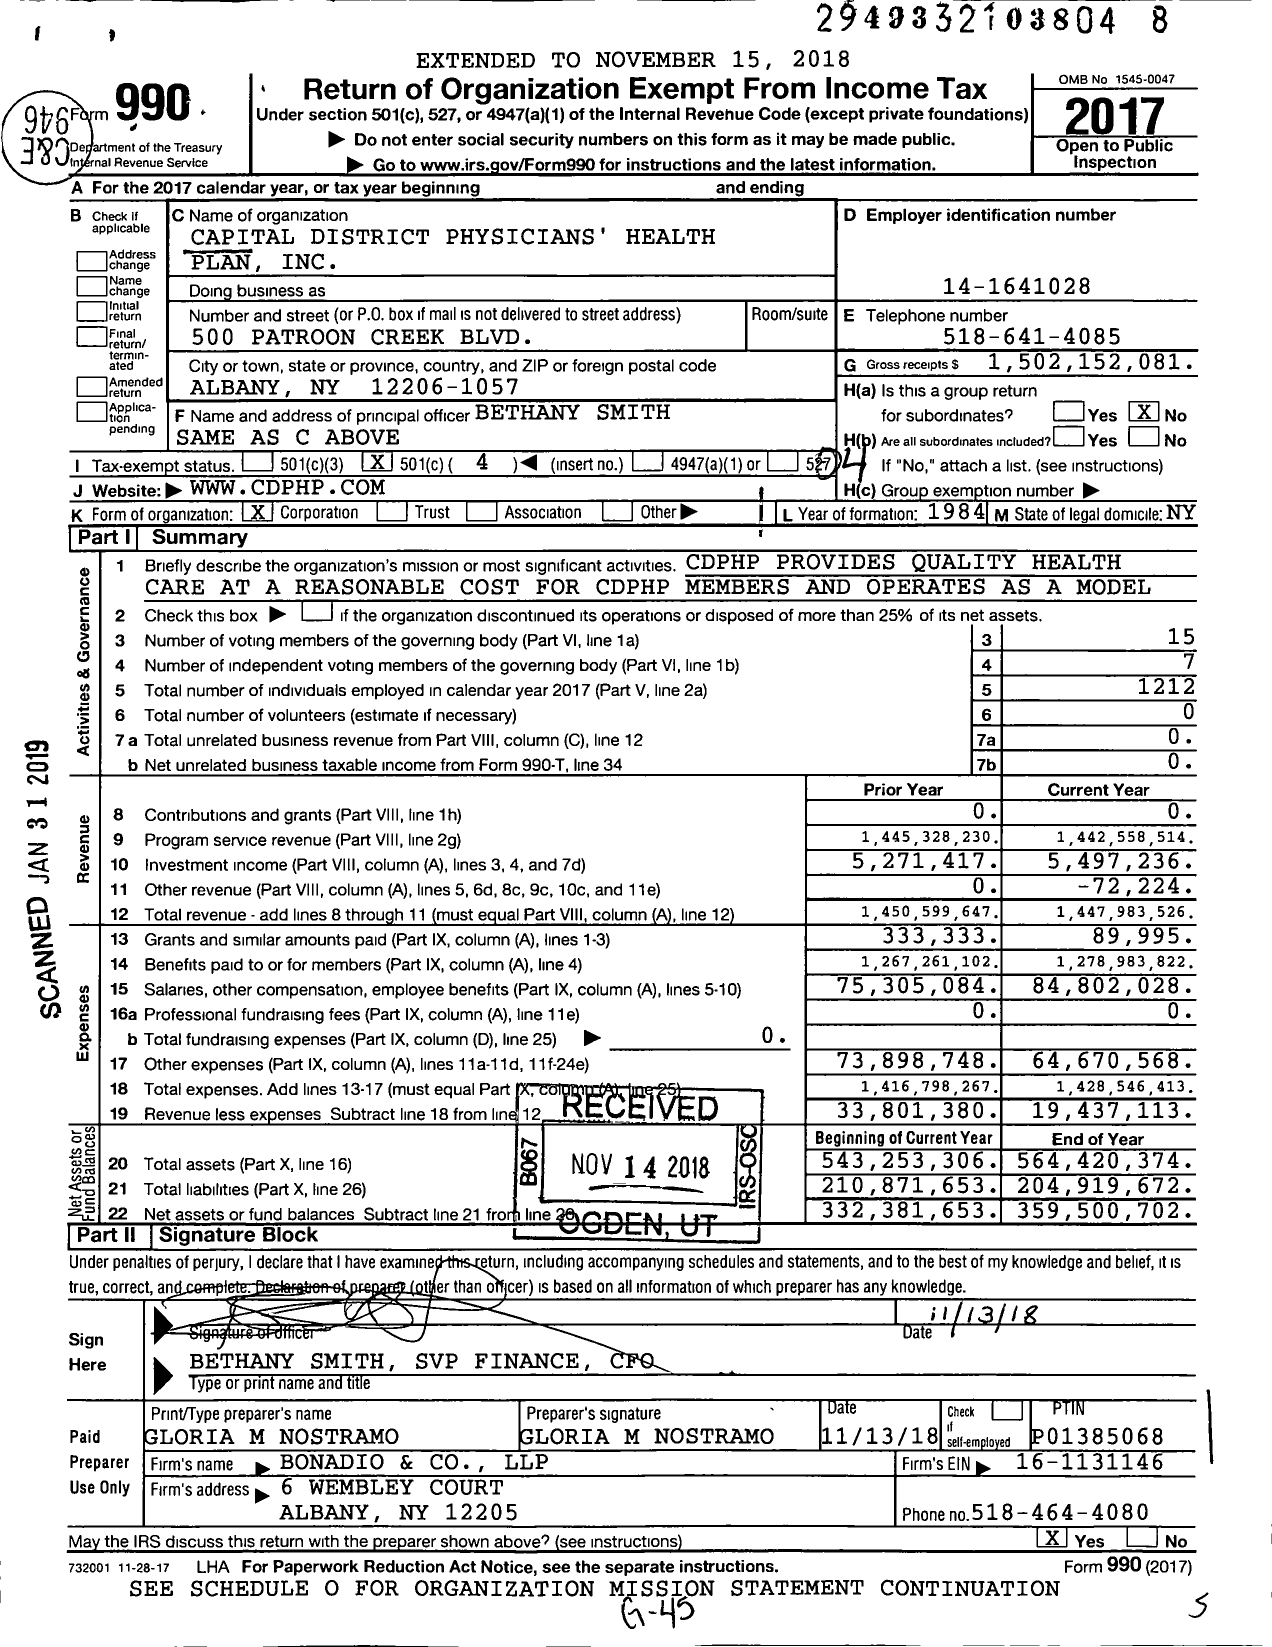 Image of first page of 2017 Form 990O for Capital District Physicians Health Plan (CDPHP)